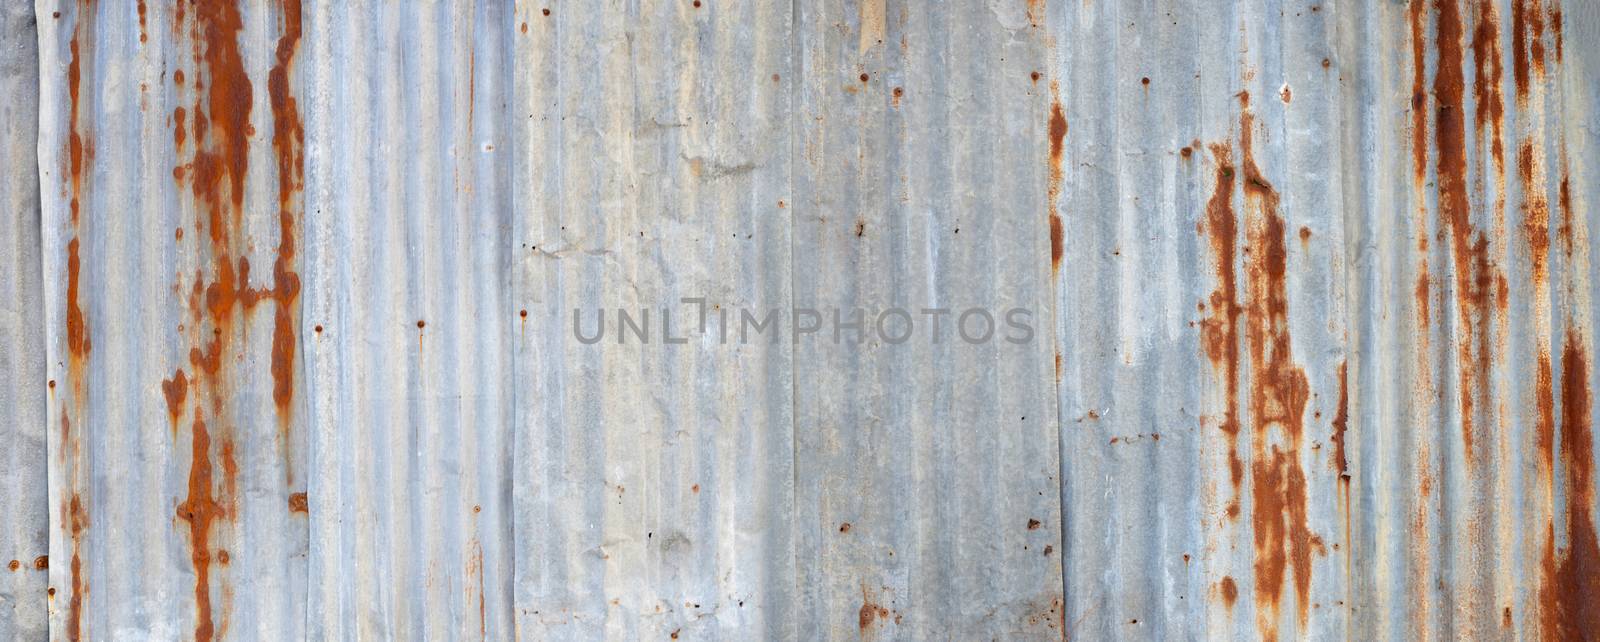 Old rusty zinc sheets for textured background. by Bowonpat